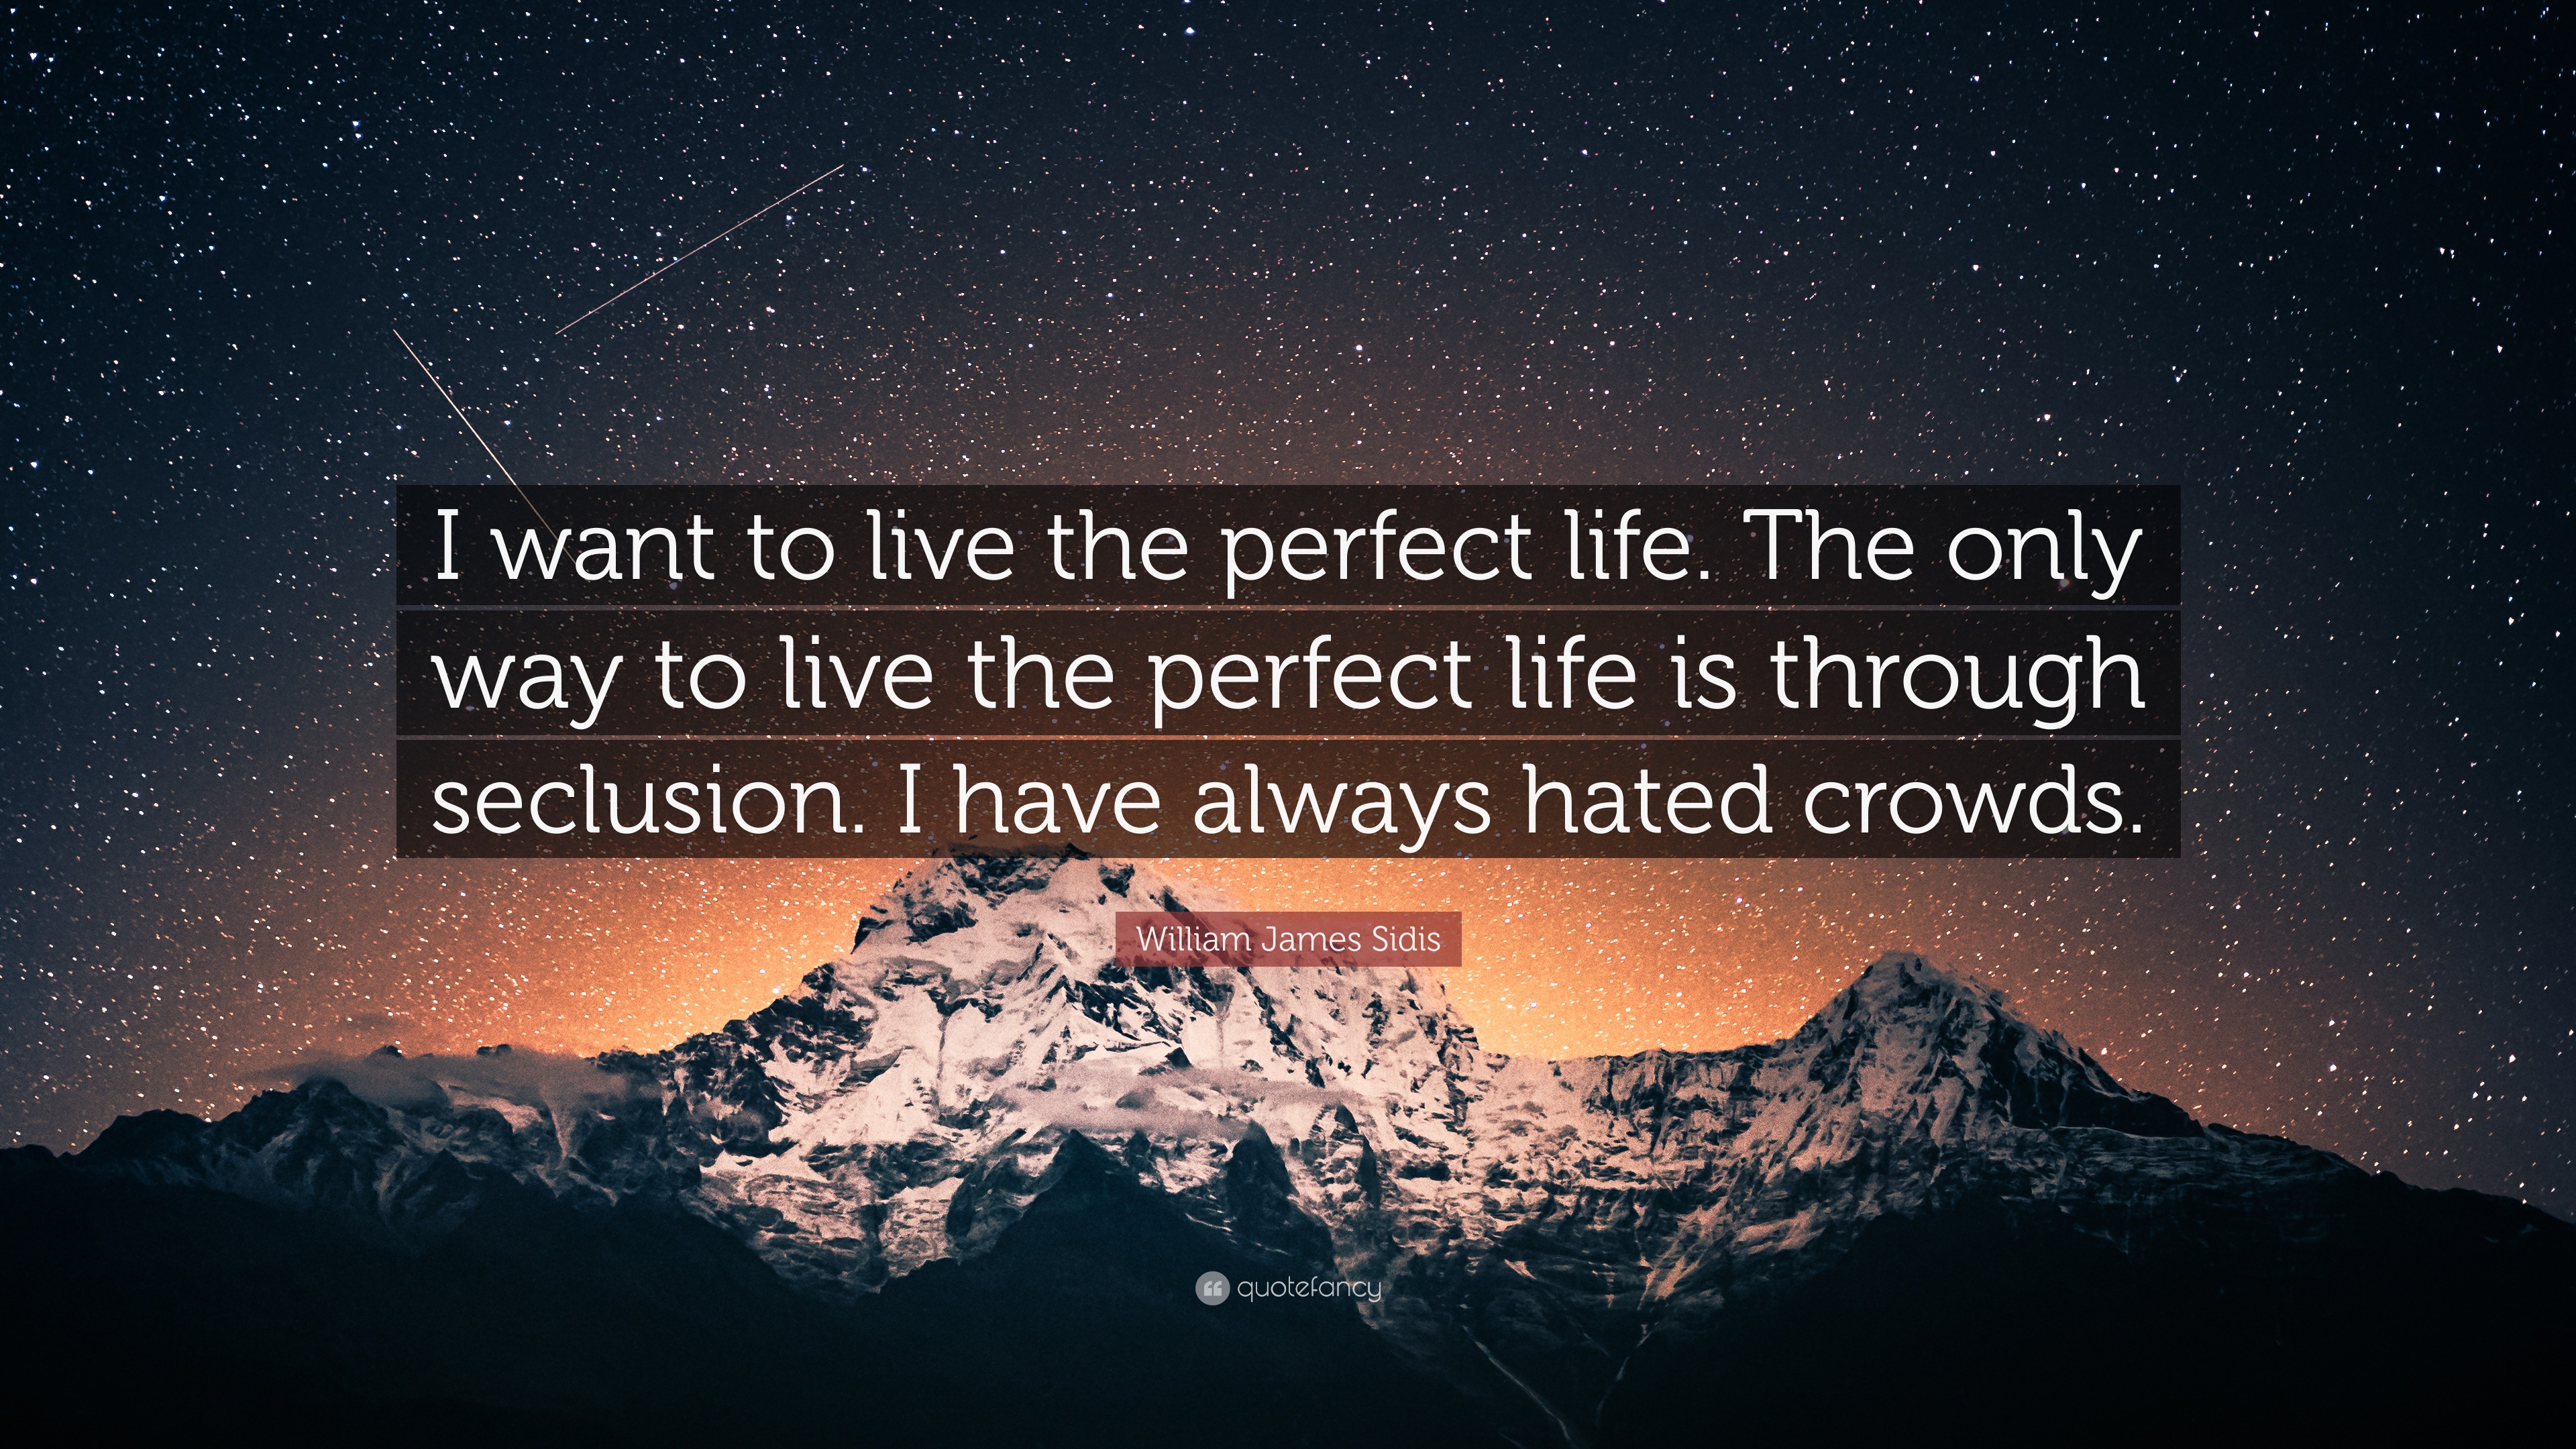 William James Sidis Quote: “I want to live the perfect life. The only way  to live